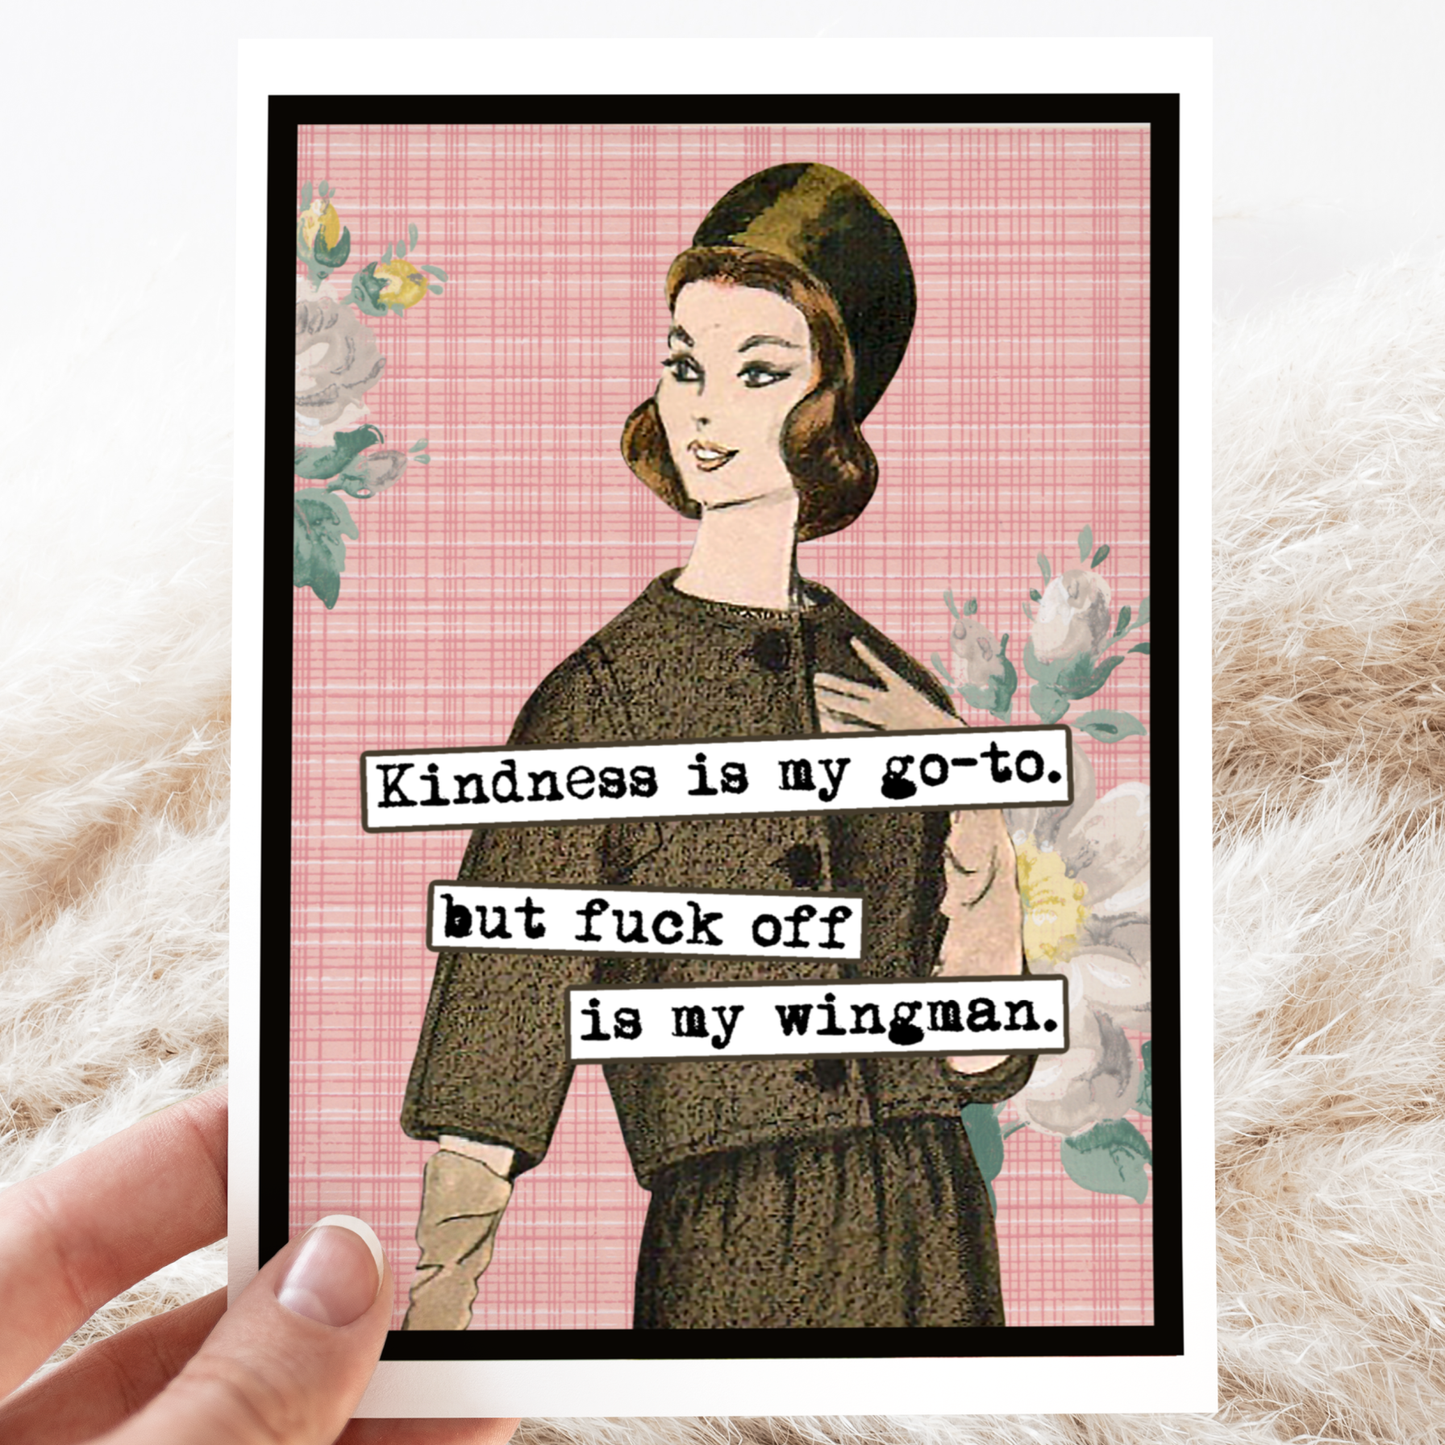 Raven's Rest Studio- CARD. Kindness Is My Go-To. But Fuck Off Is My Wingman.